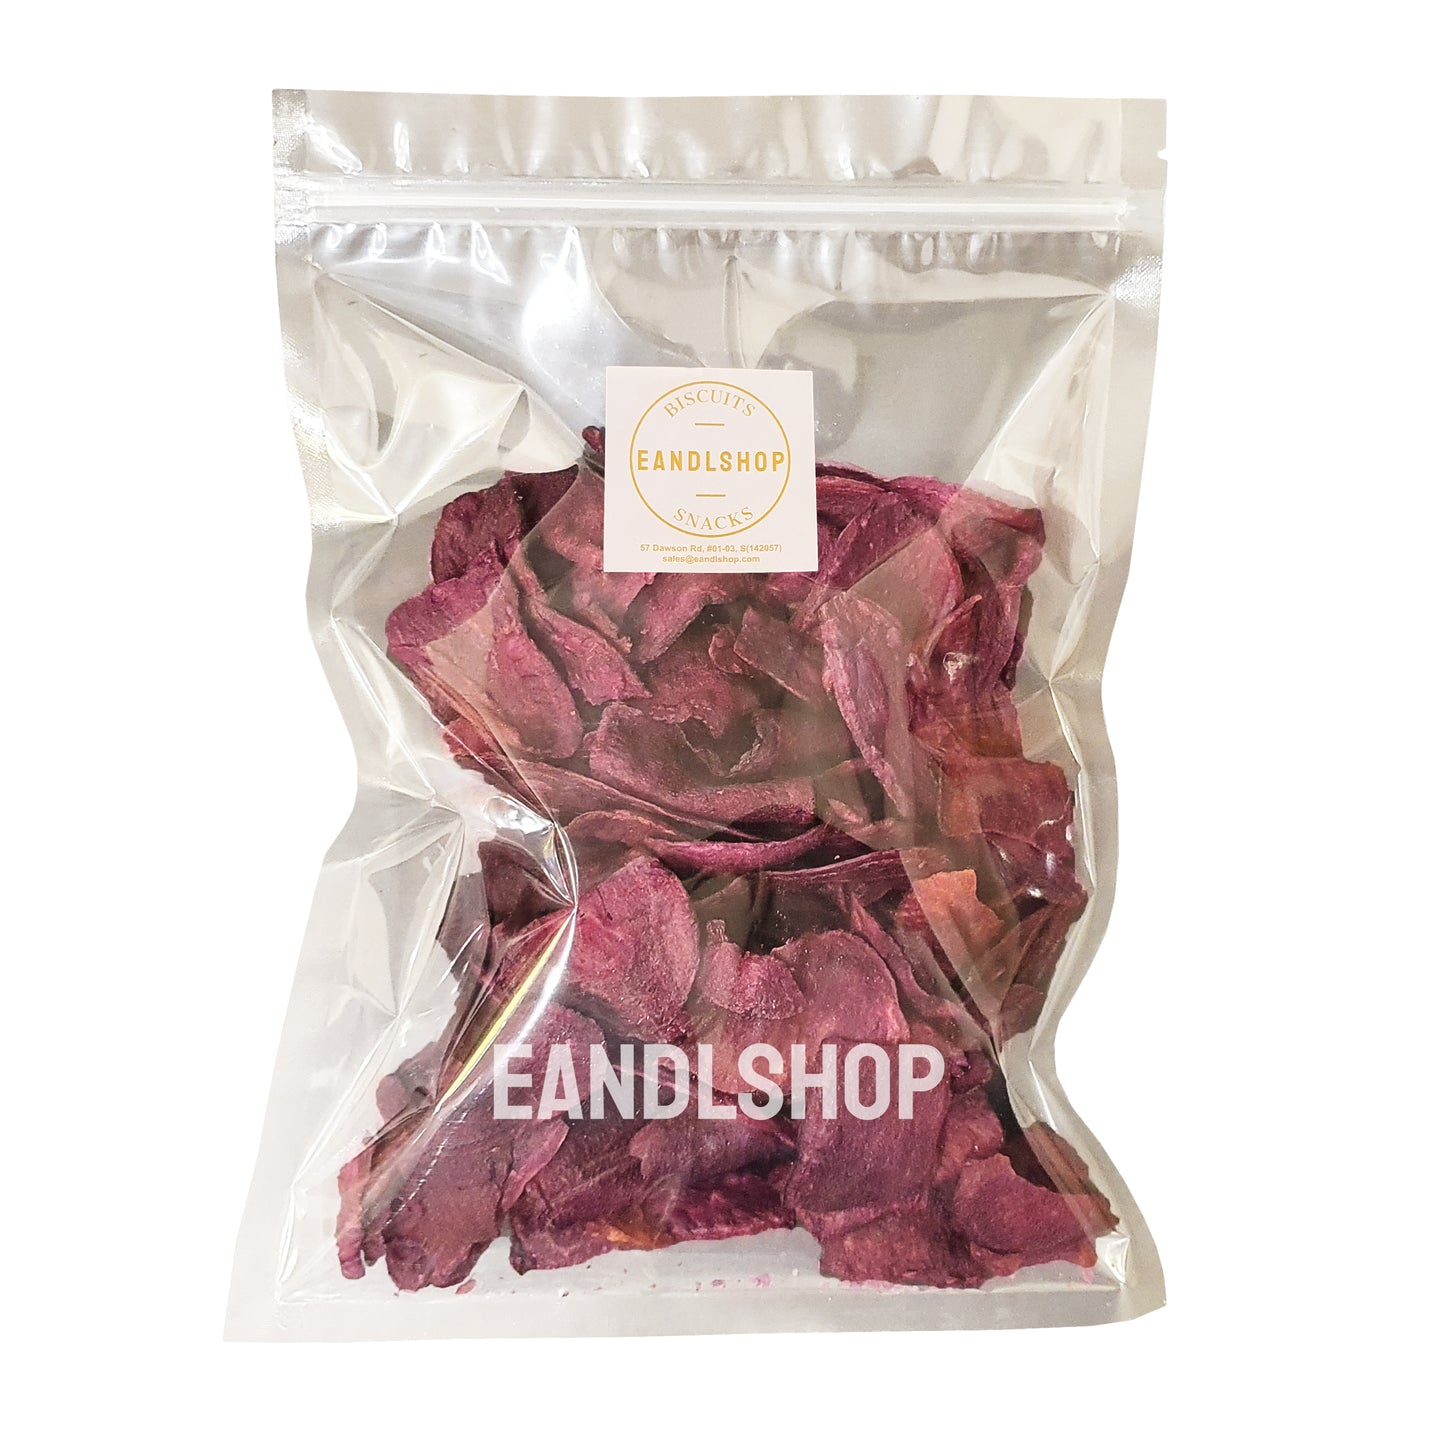 Sweet Potato Chips. Old-school biscuits, modern snacks (chips, crackers), cakes, gummies, plums, dried fruits, nuts, herbal tea – available at www.EANDLSHOP.com